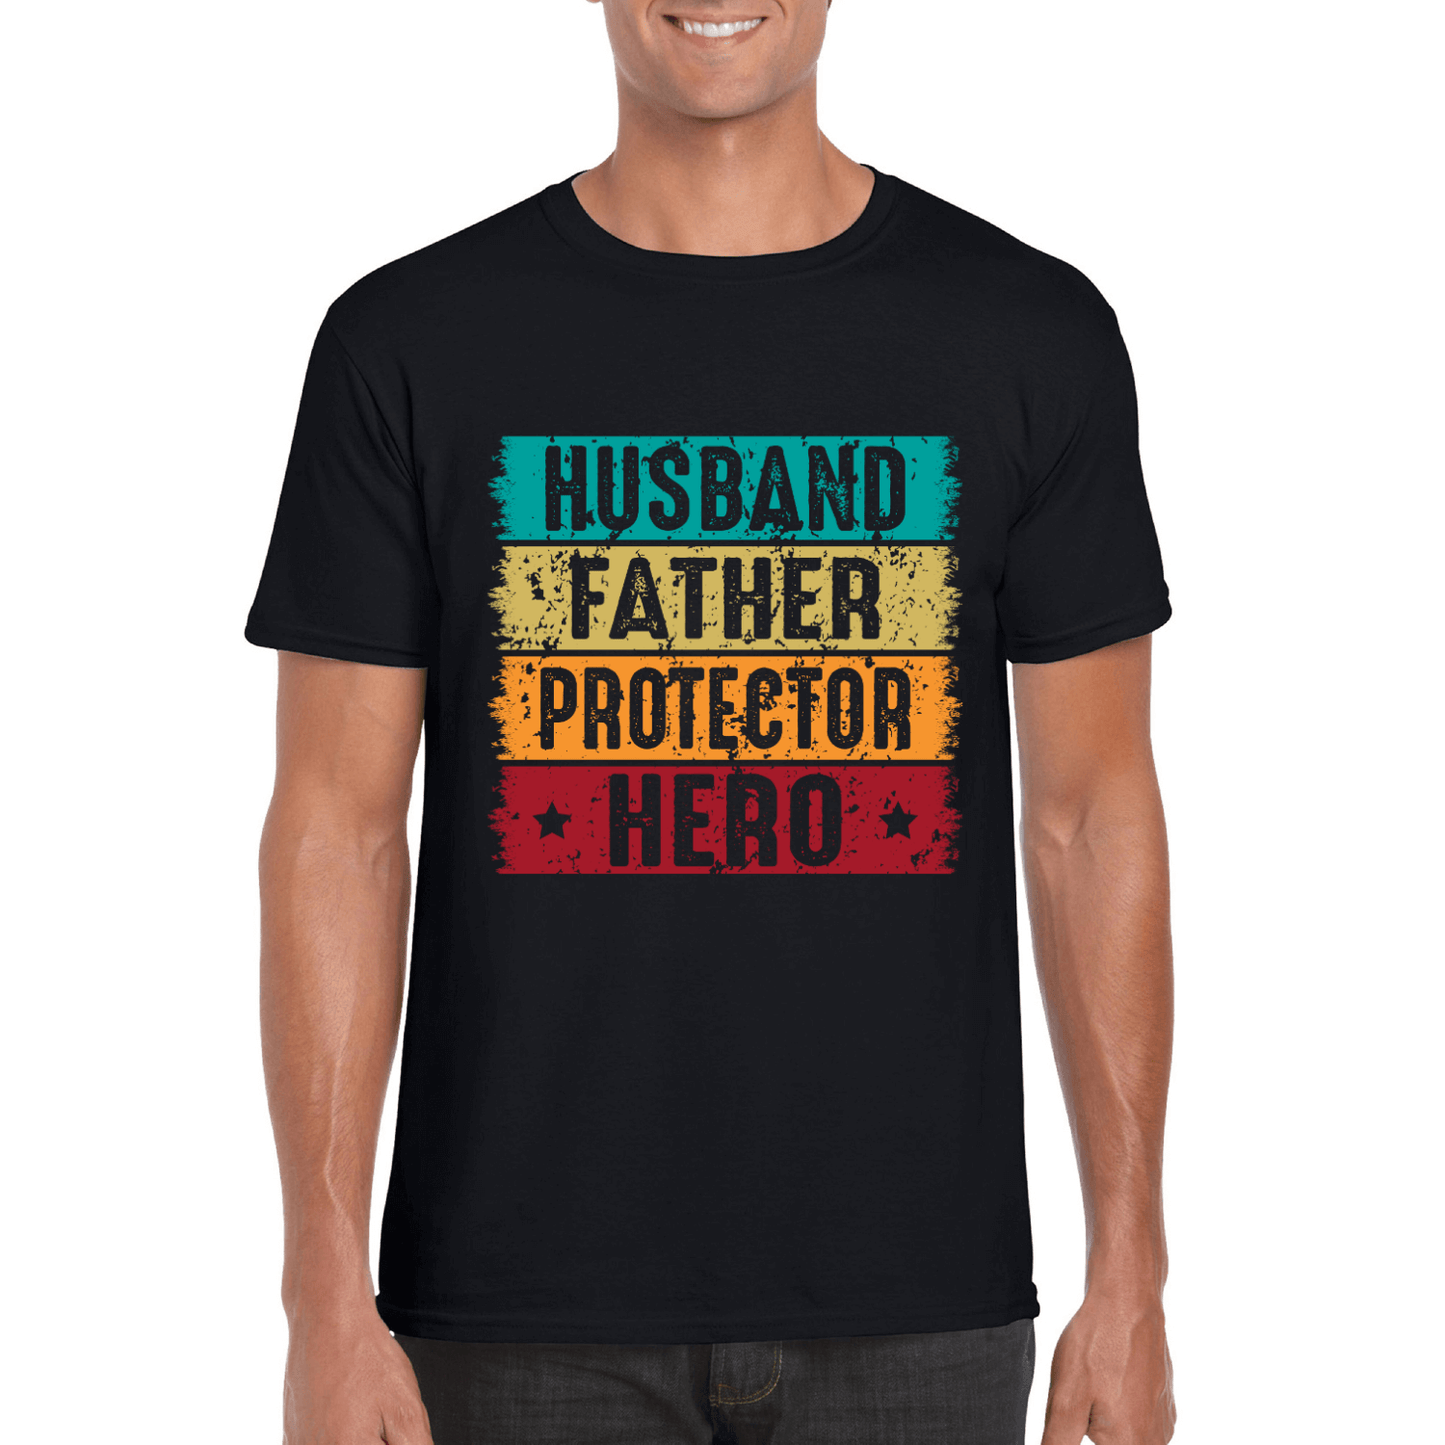 Vintage Father's Day T-shirt - Husband, Father, Protector, Hero